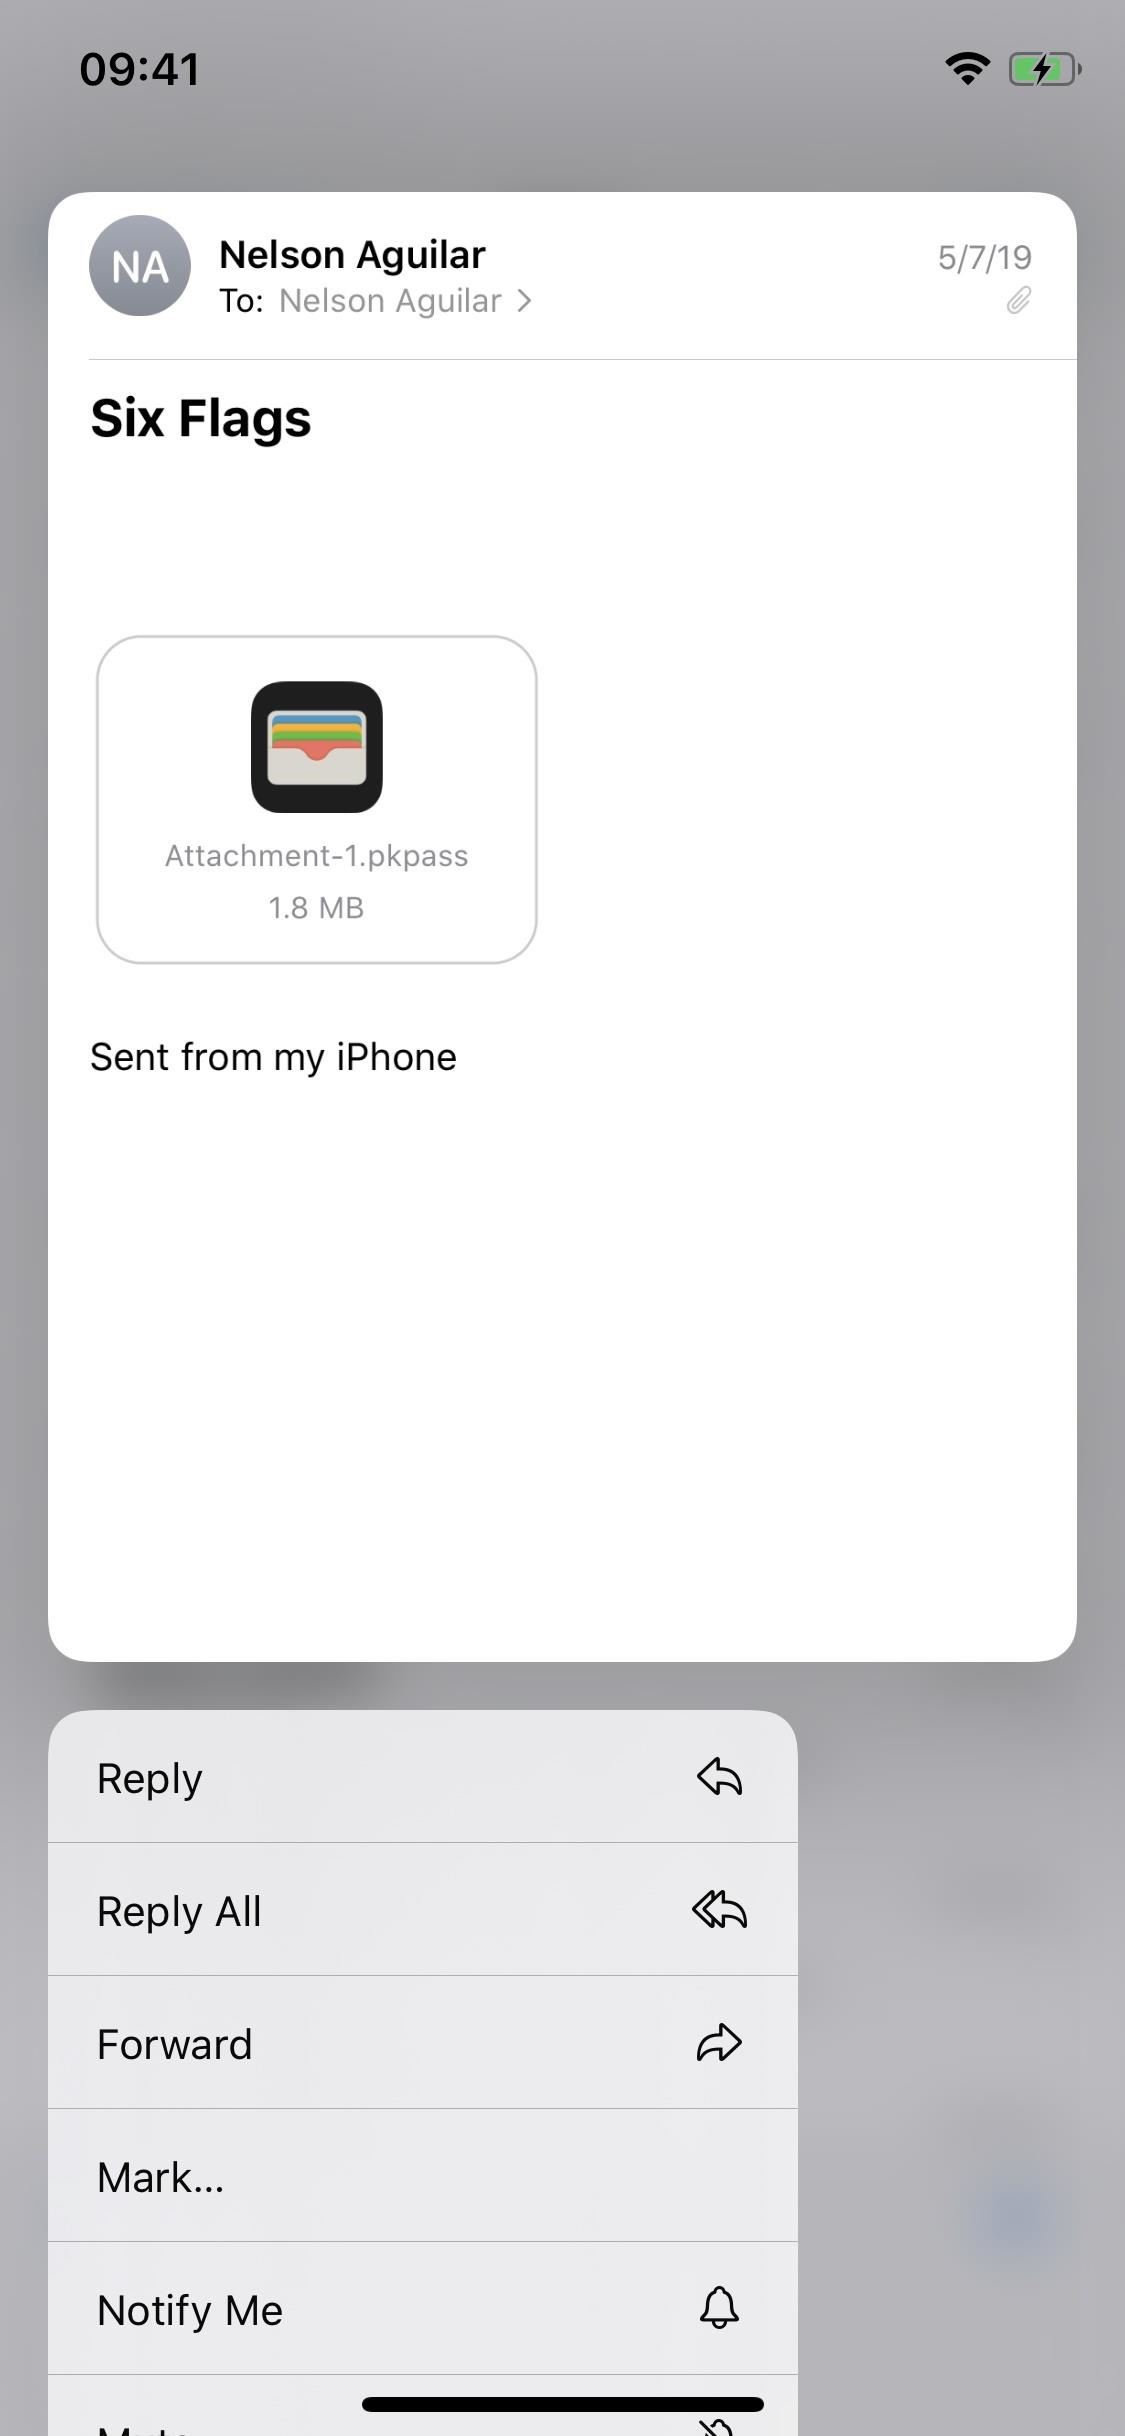 22 New Features in iOS 13's Mail App to Help You Master the Art of the Email